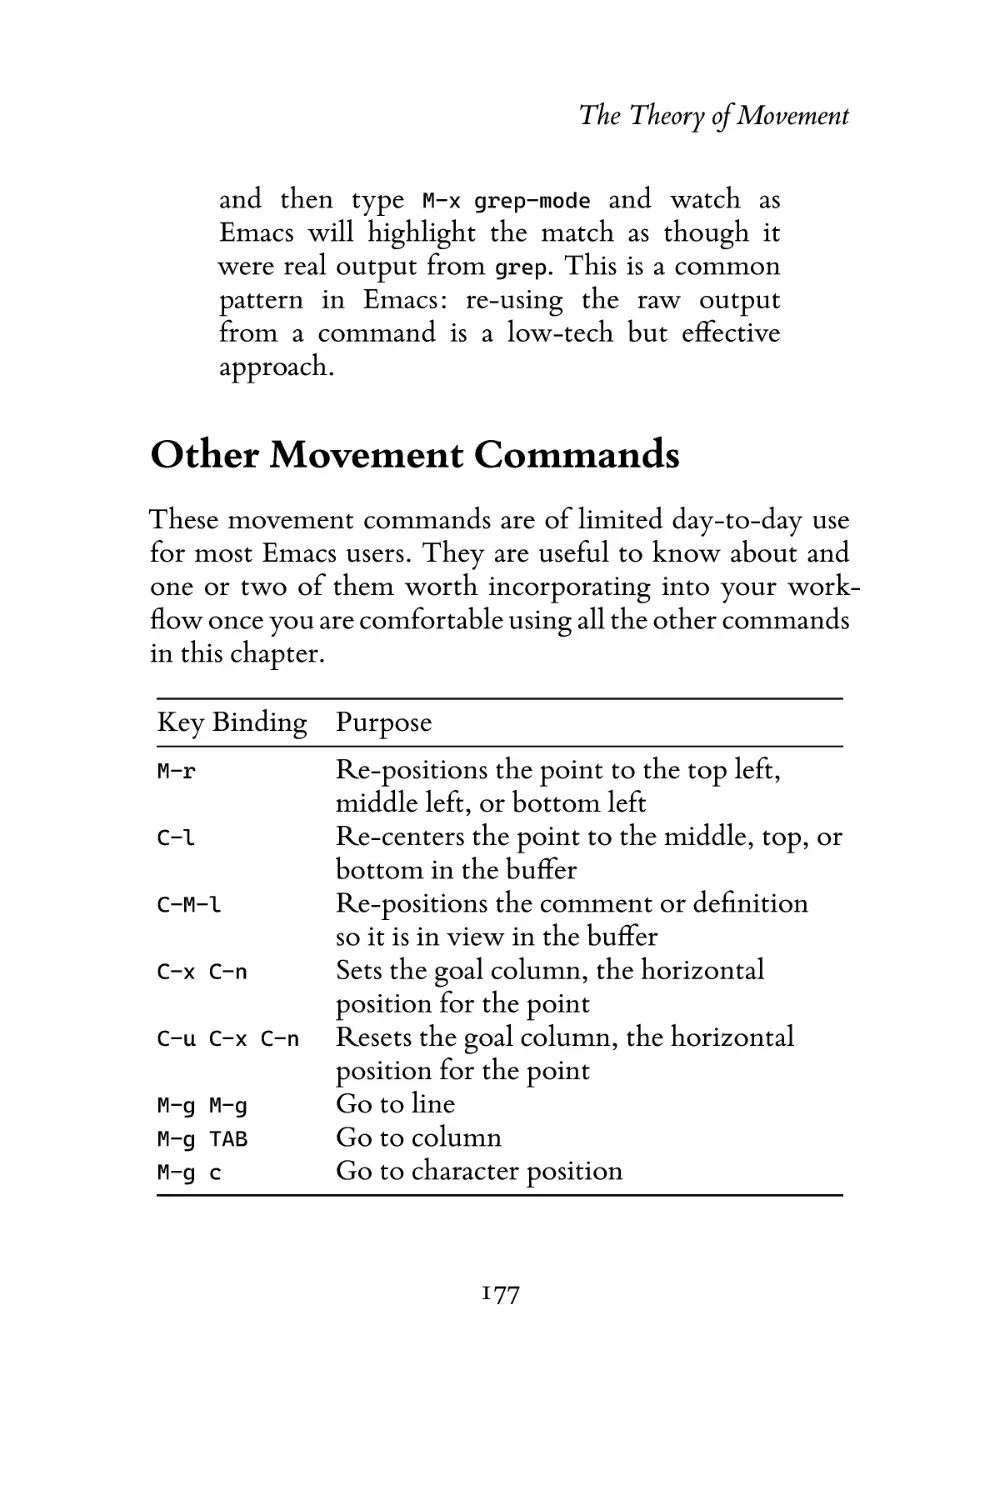 Other Movement Commands